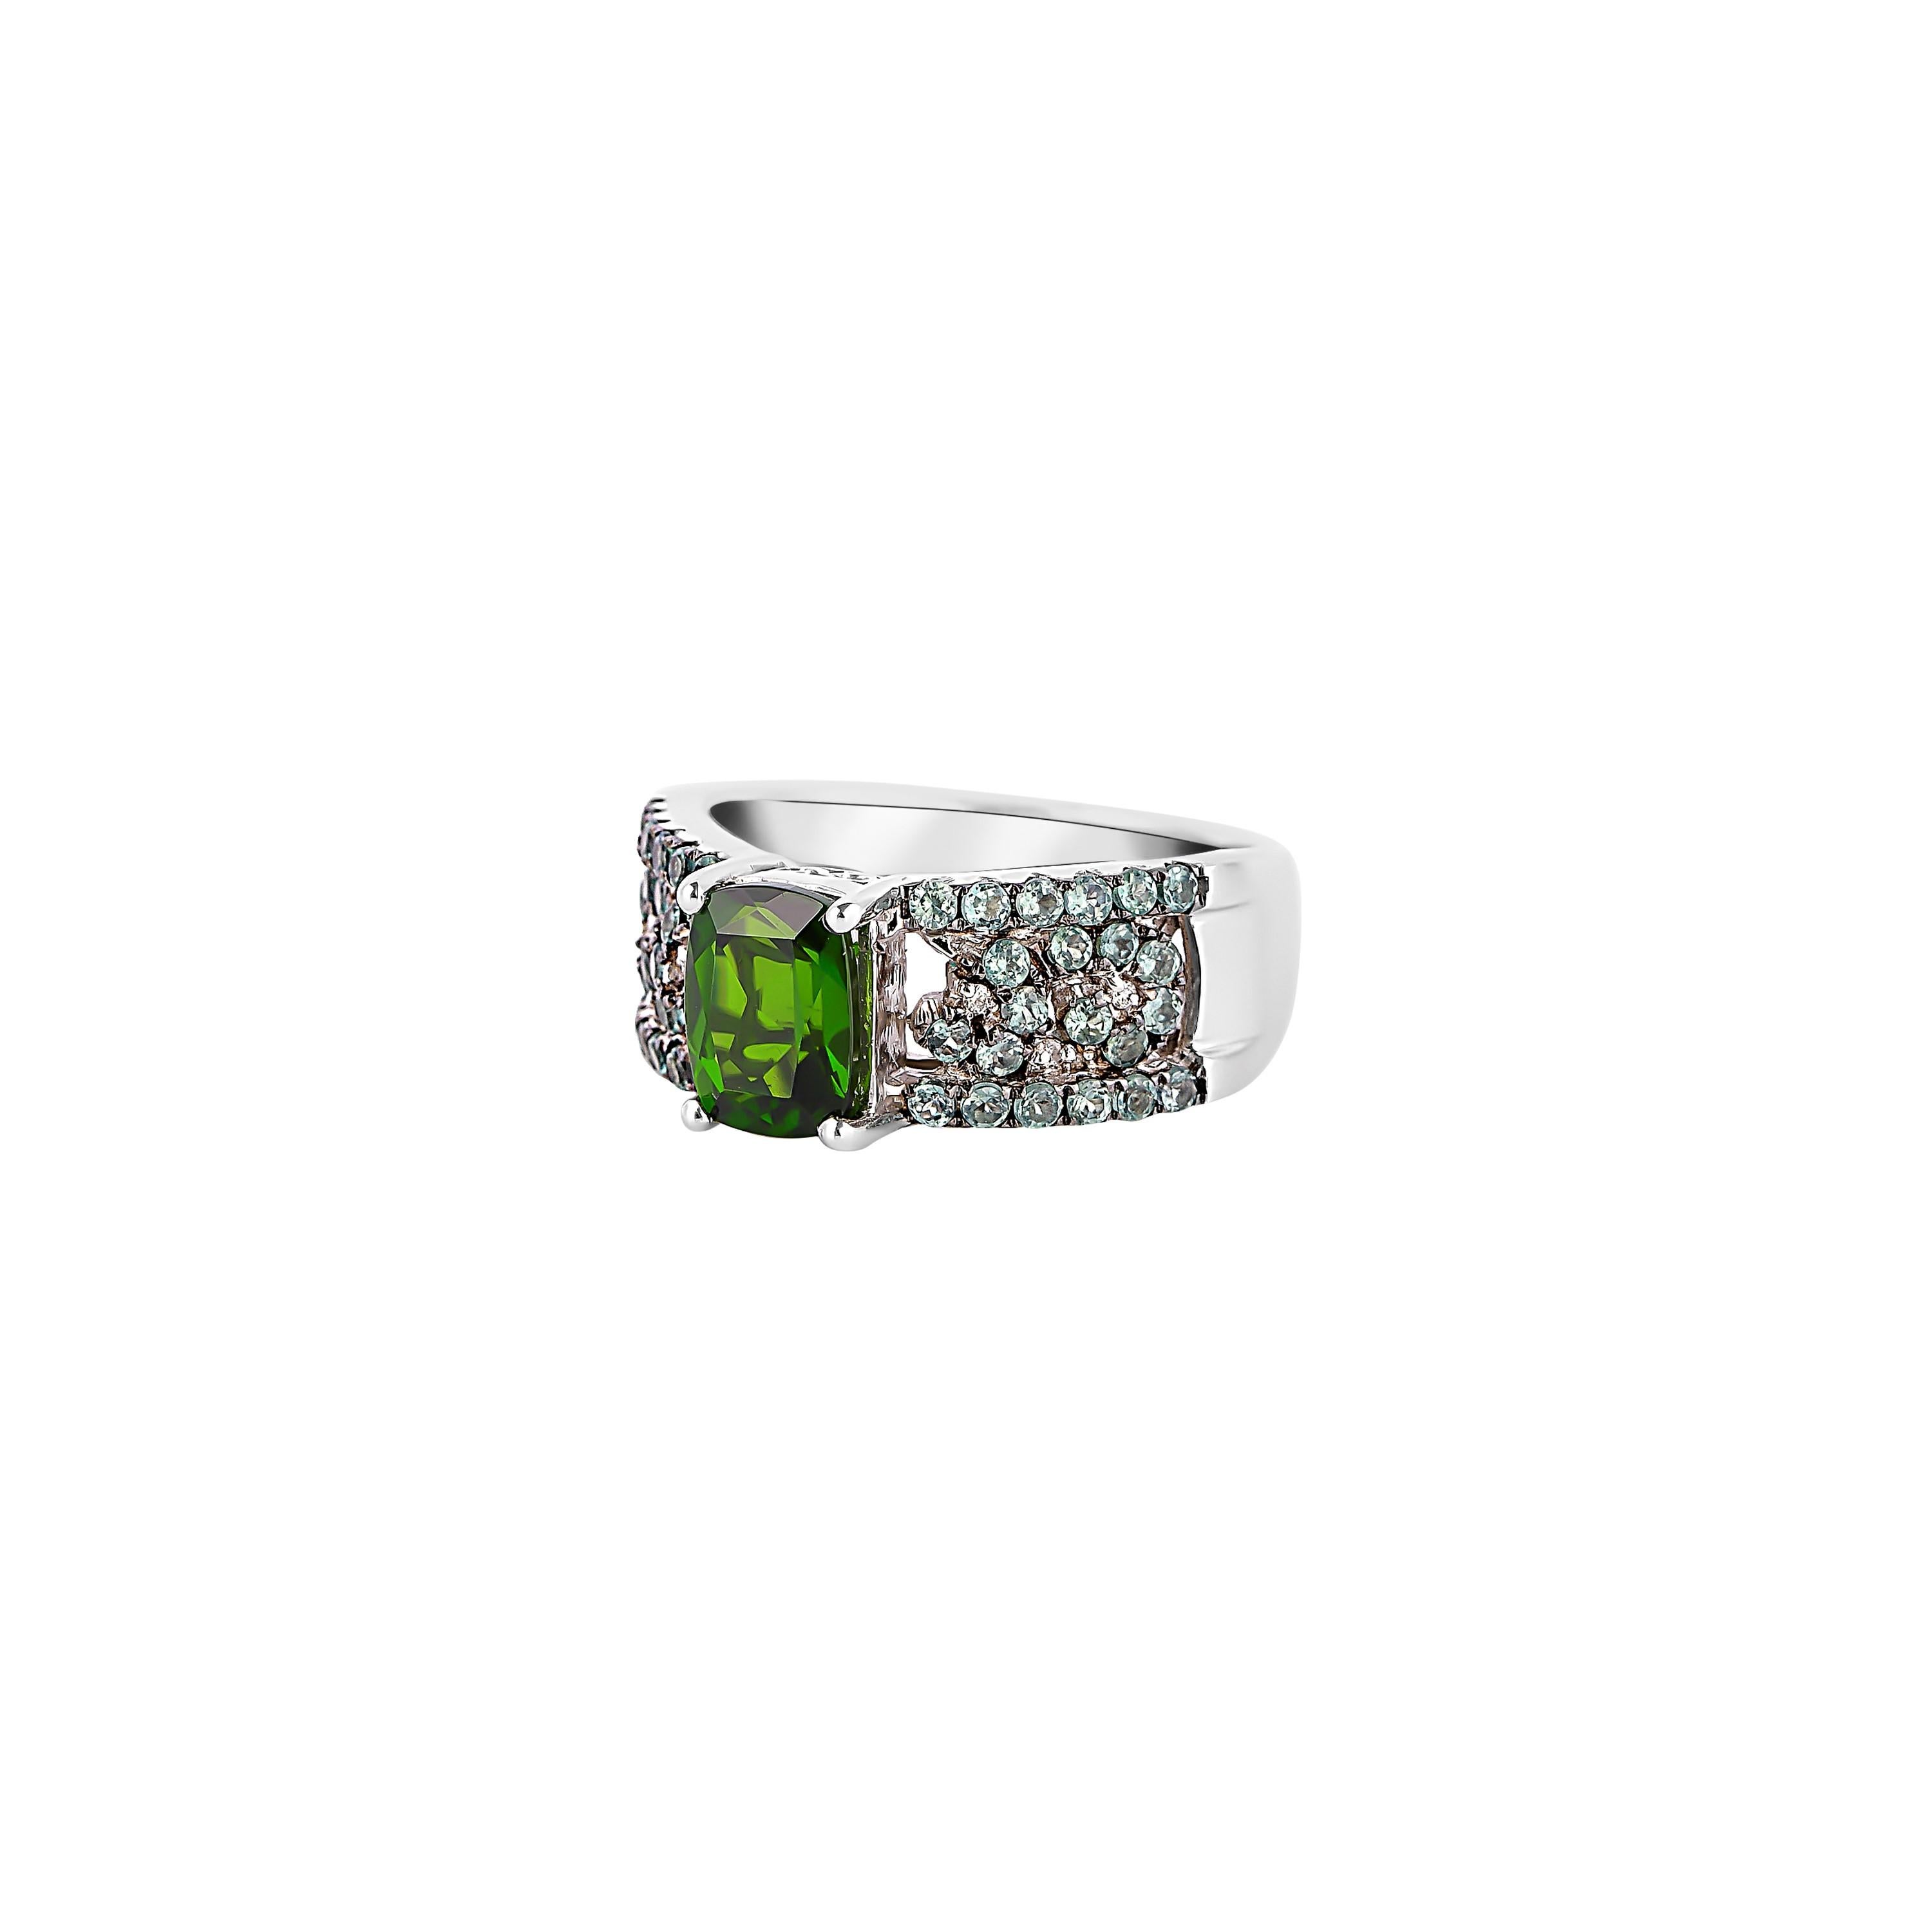 Contemporary 1.50 Carat Chrome Diopside Ring in 14 Karat White Gold For Sale